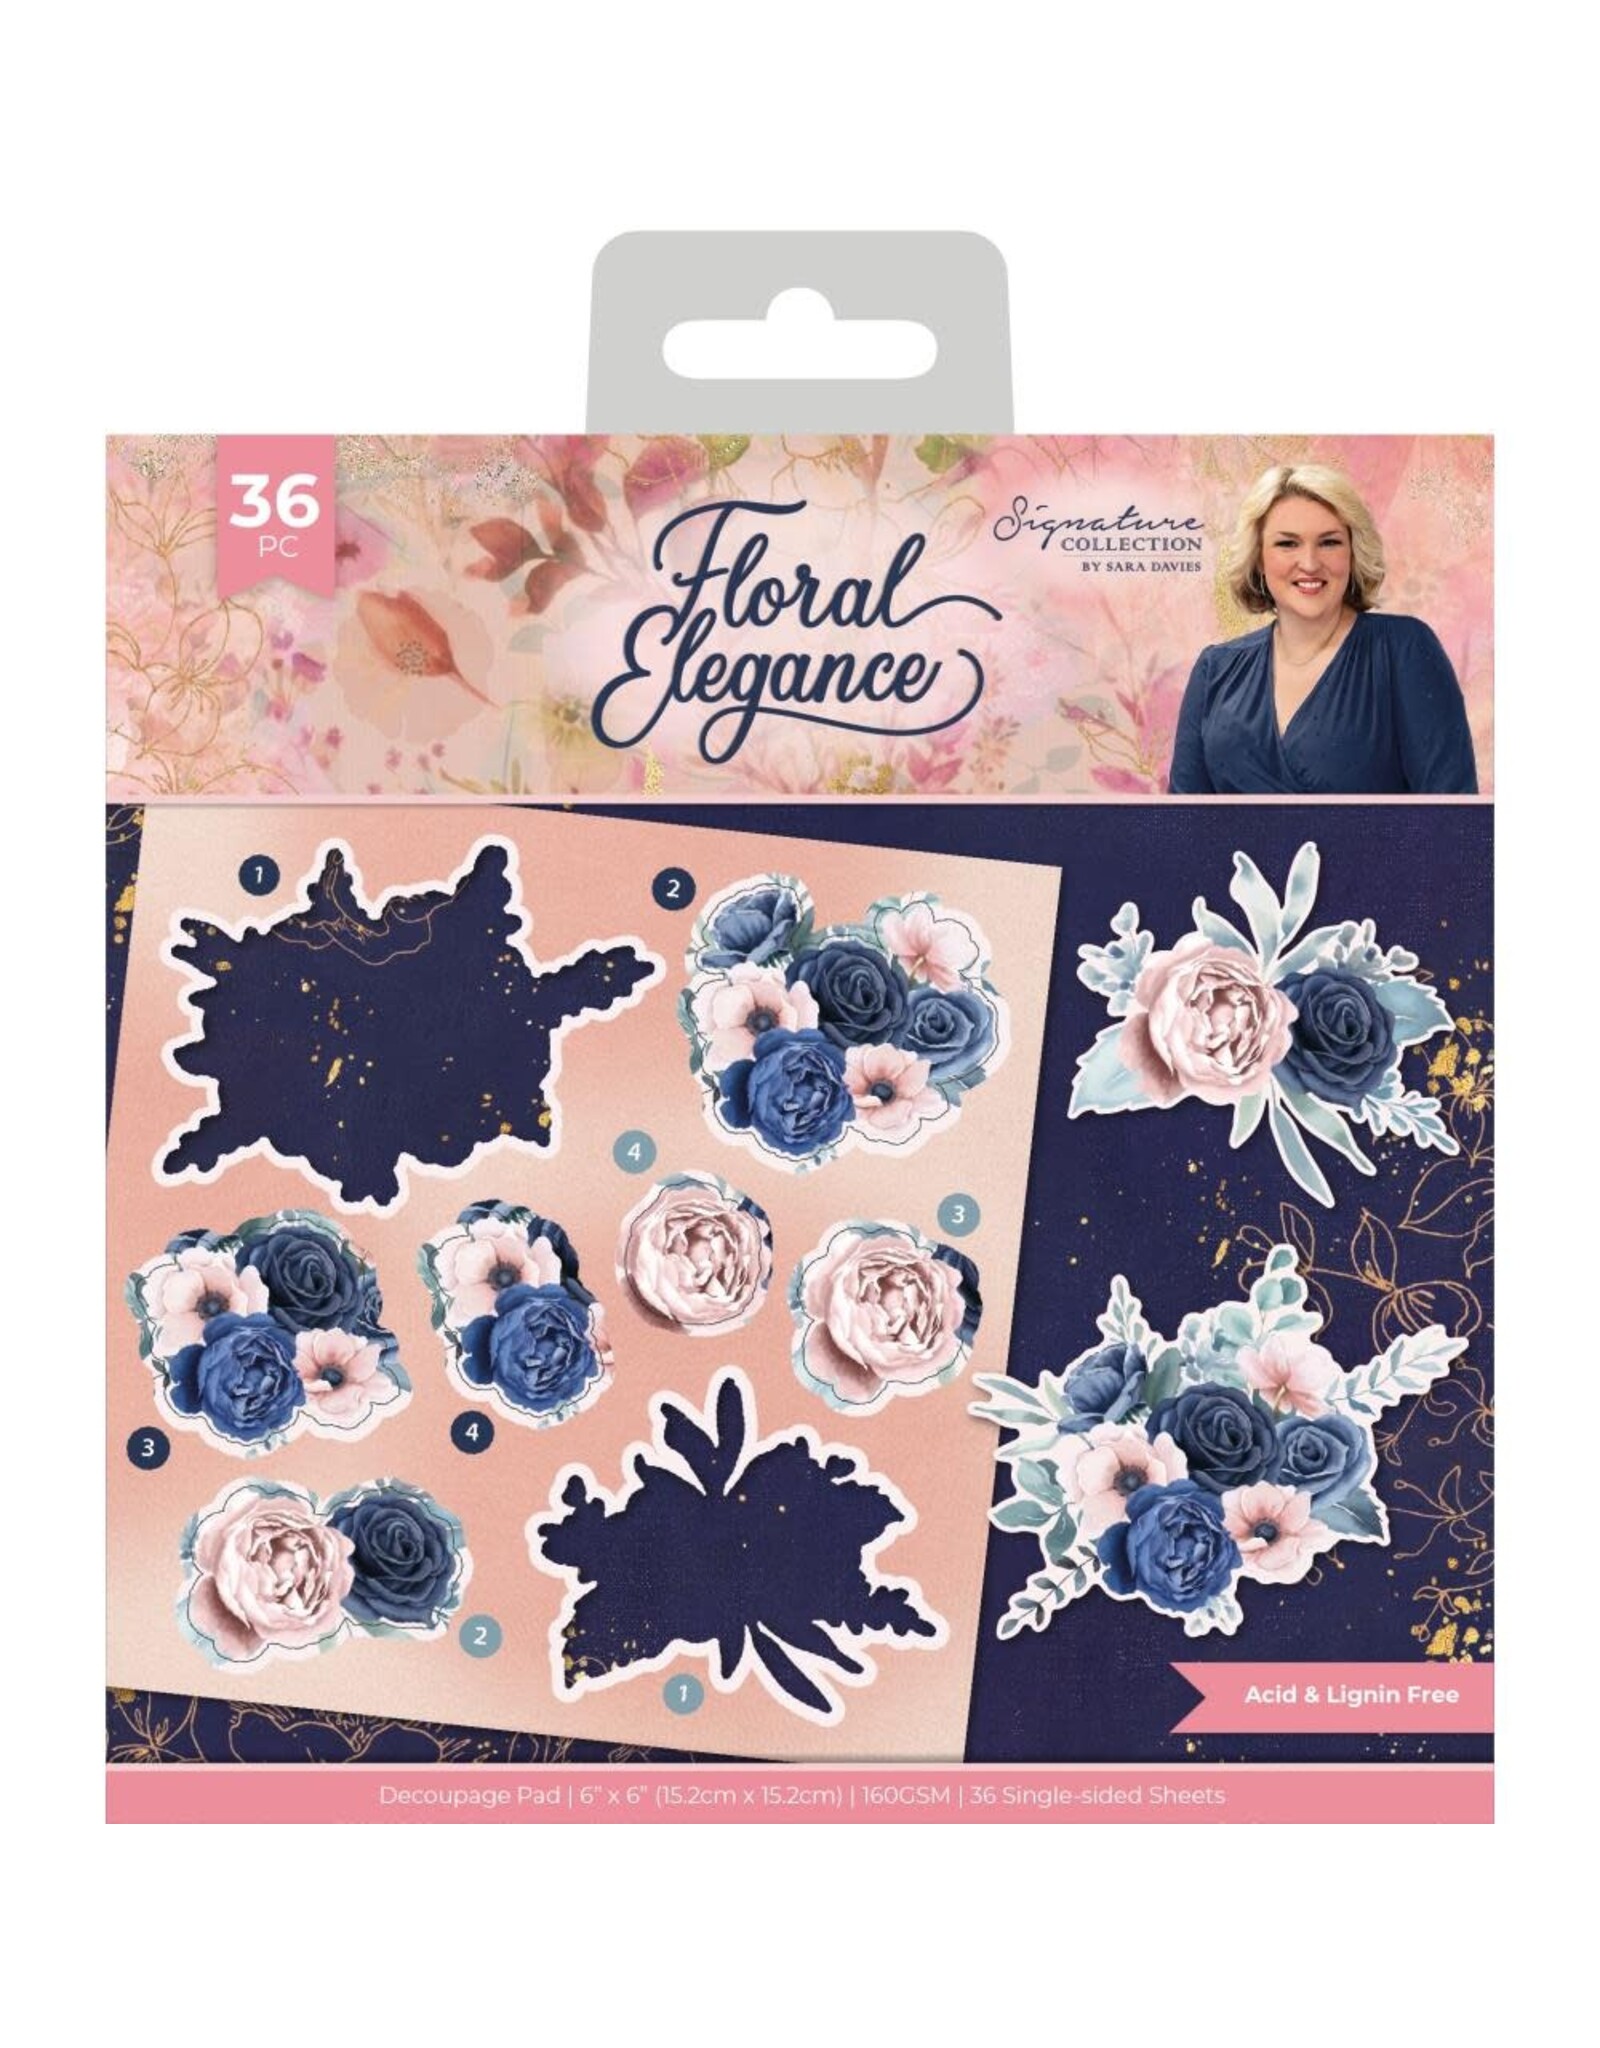 CRAFTERS COMPANION CRAFTERS COMPANION SARA DAVIES SIGNATURE COLLECTION FLORAL ELEGANCE 6x6 DECOUPAGE PAD